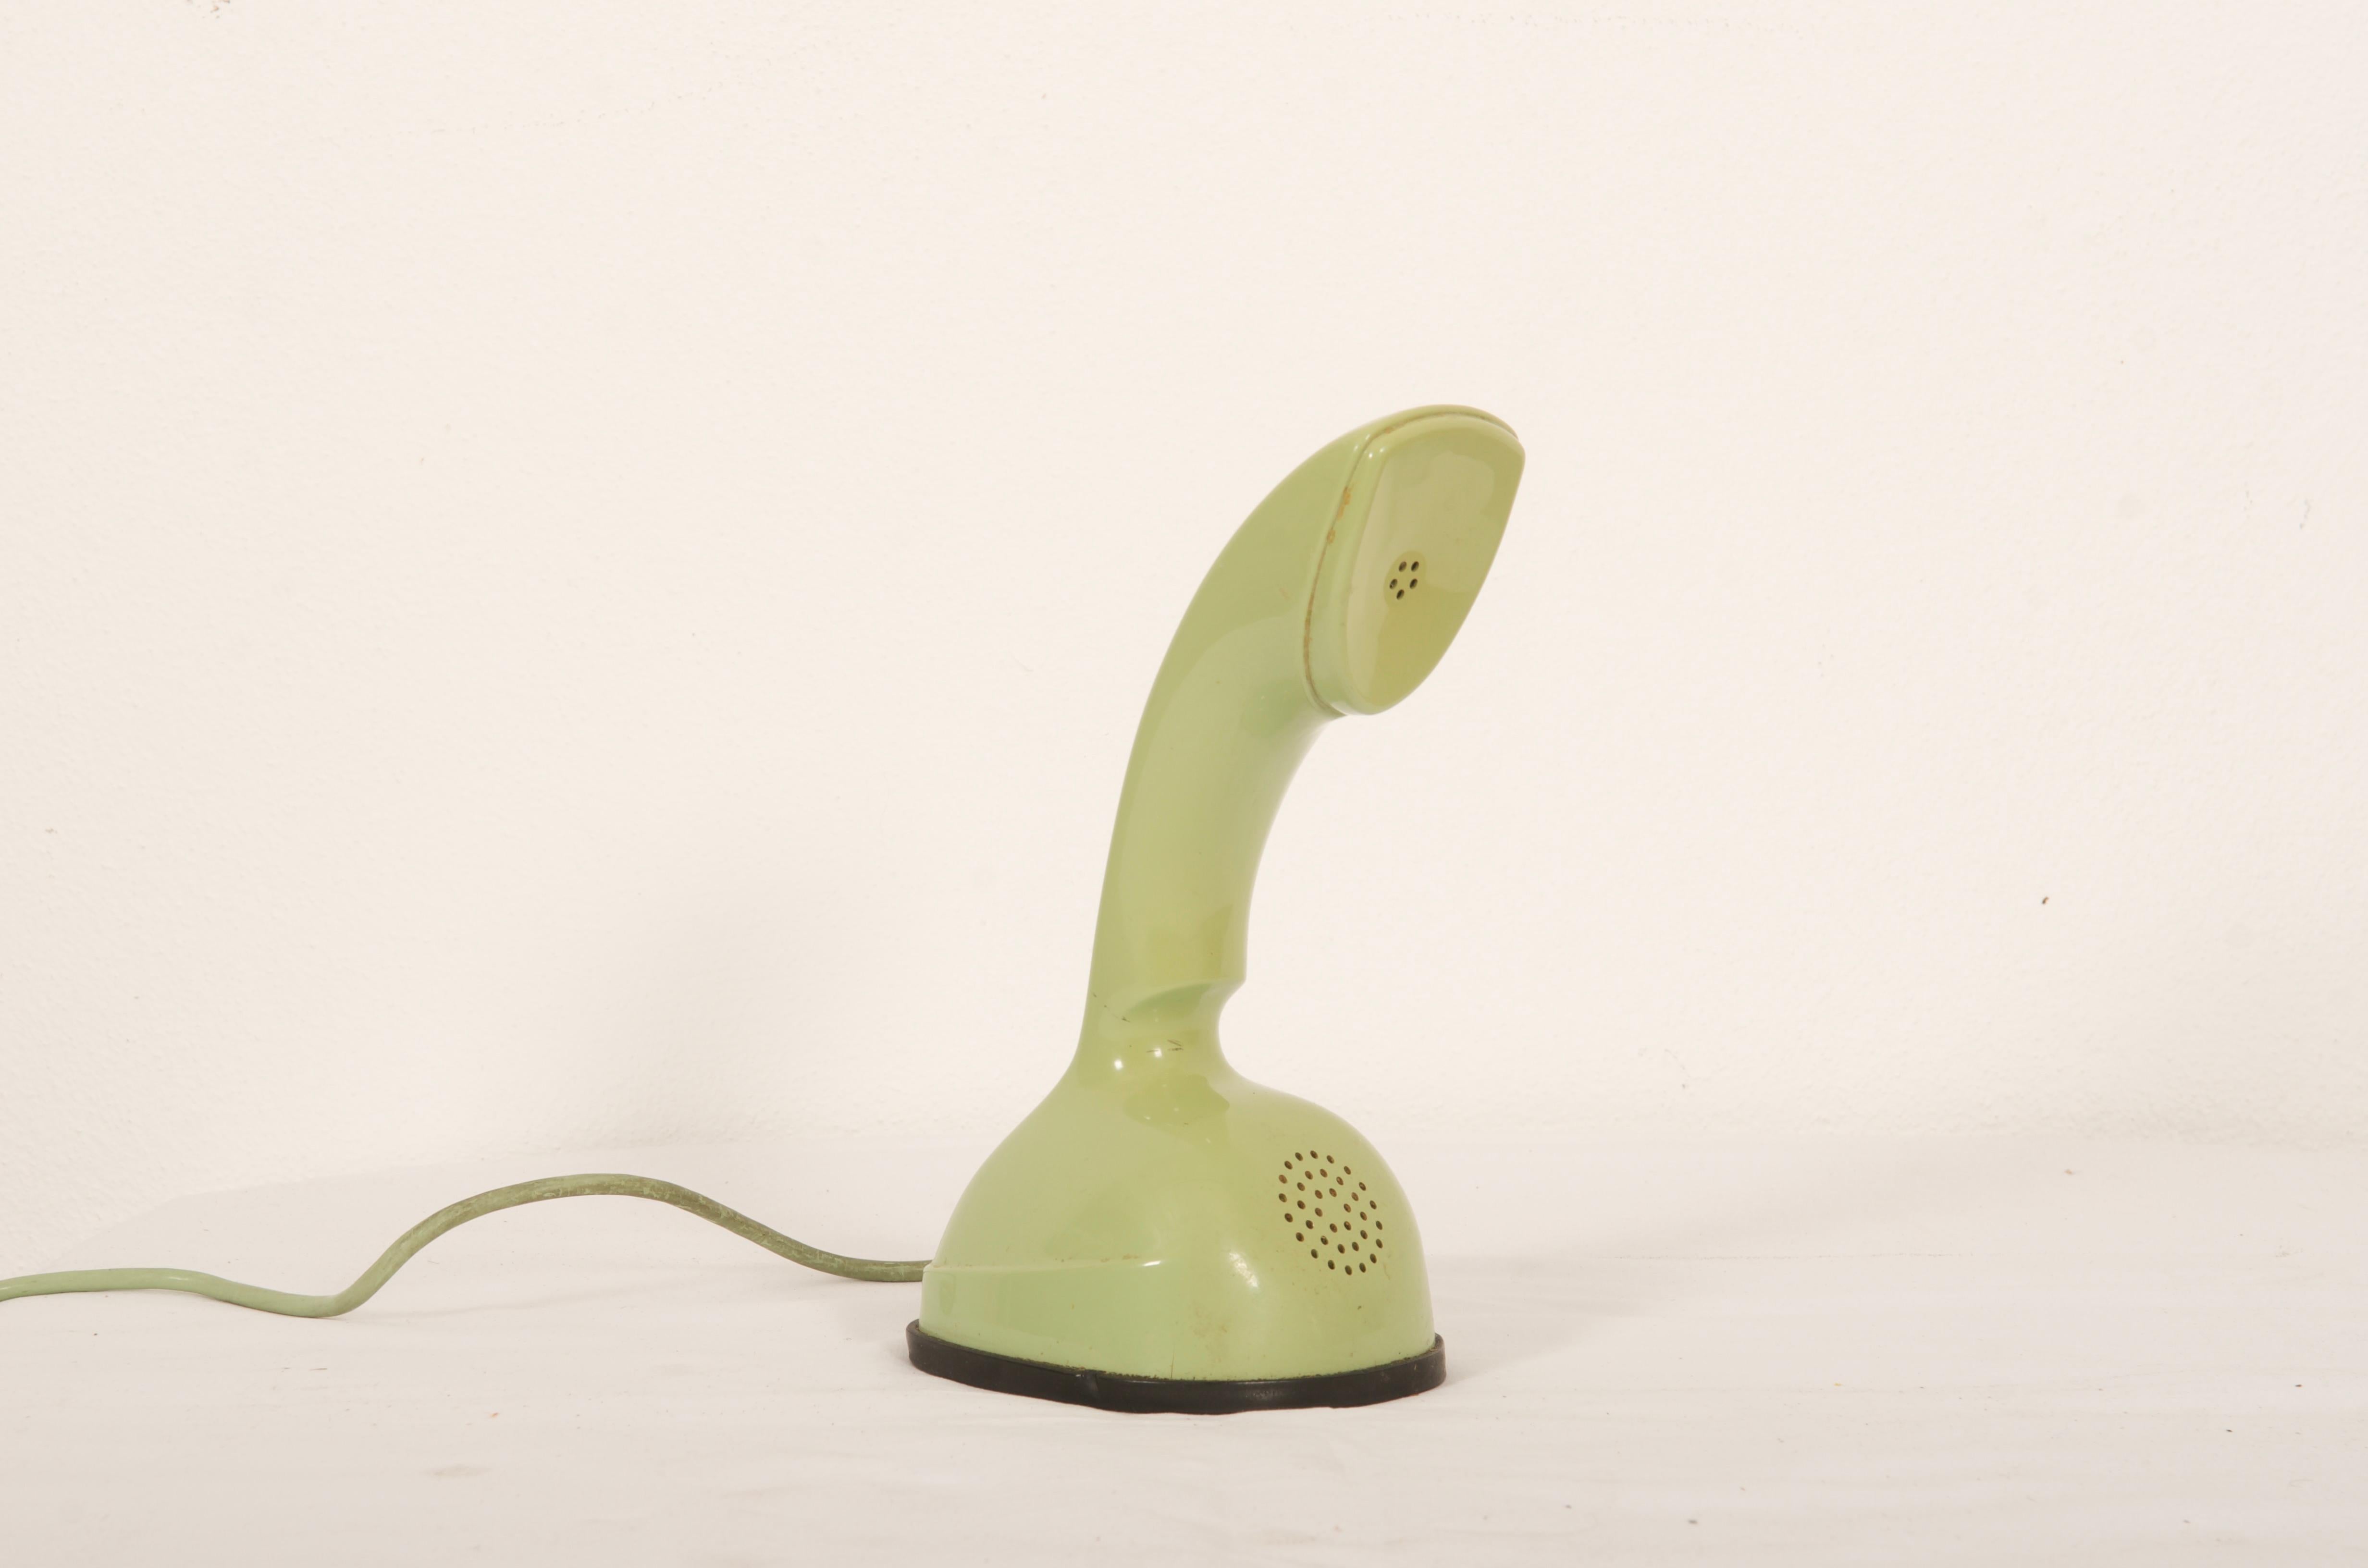 Vintage Rotary dial green ericofone. This is the model Cobra. It is made of thermoplastic ABS
Designed in the 1950s in Sweden by Hugo Blomberg, Ralph Lysell and Gösta Thames, LM Ericsson.